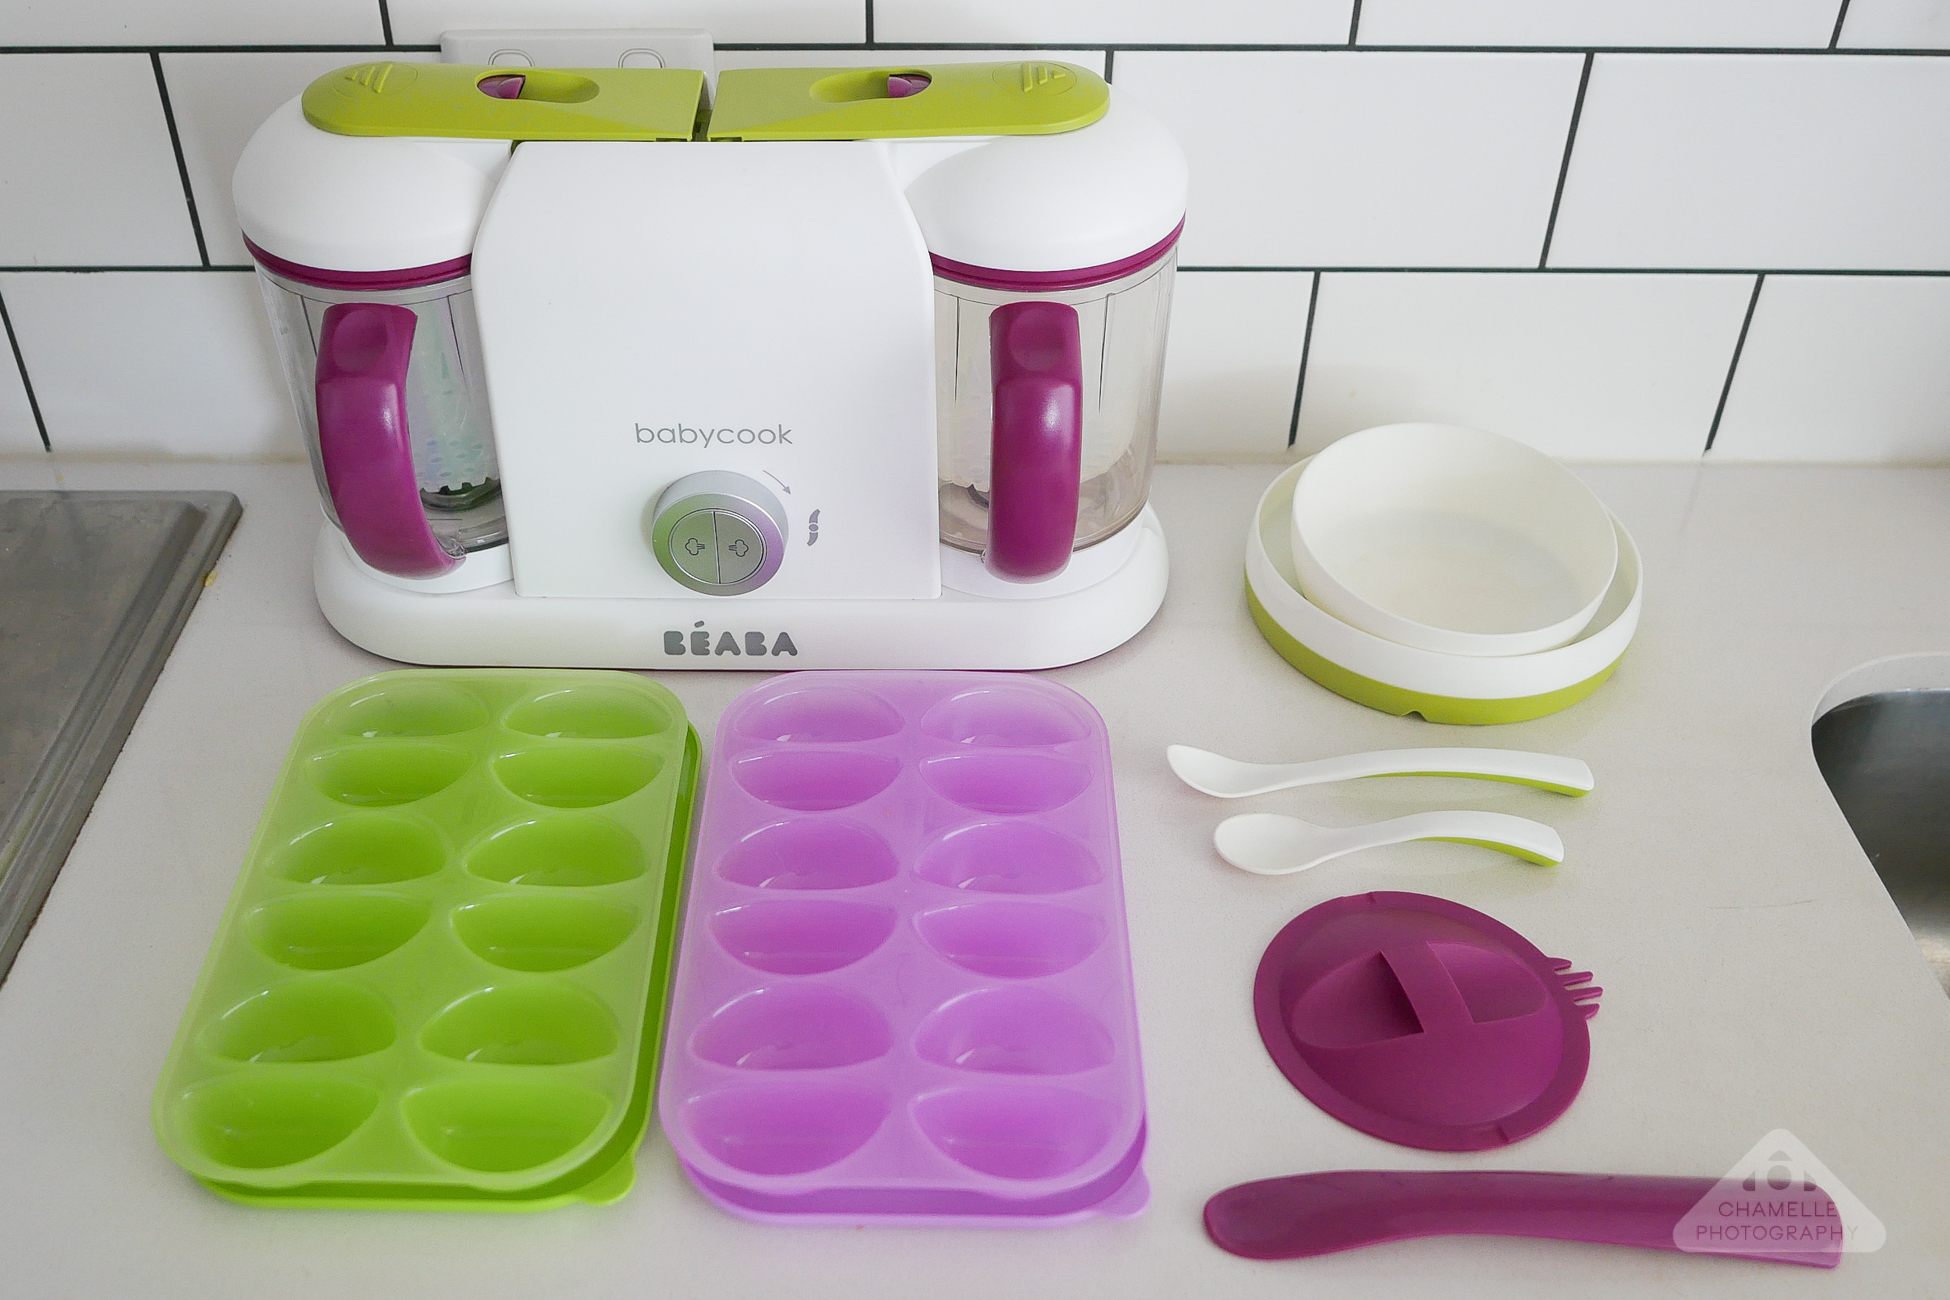 Beaba Babycook pro Baby feeding solids Essential pregnancy and baby items